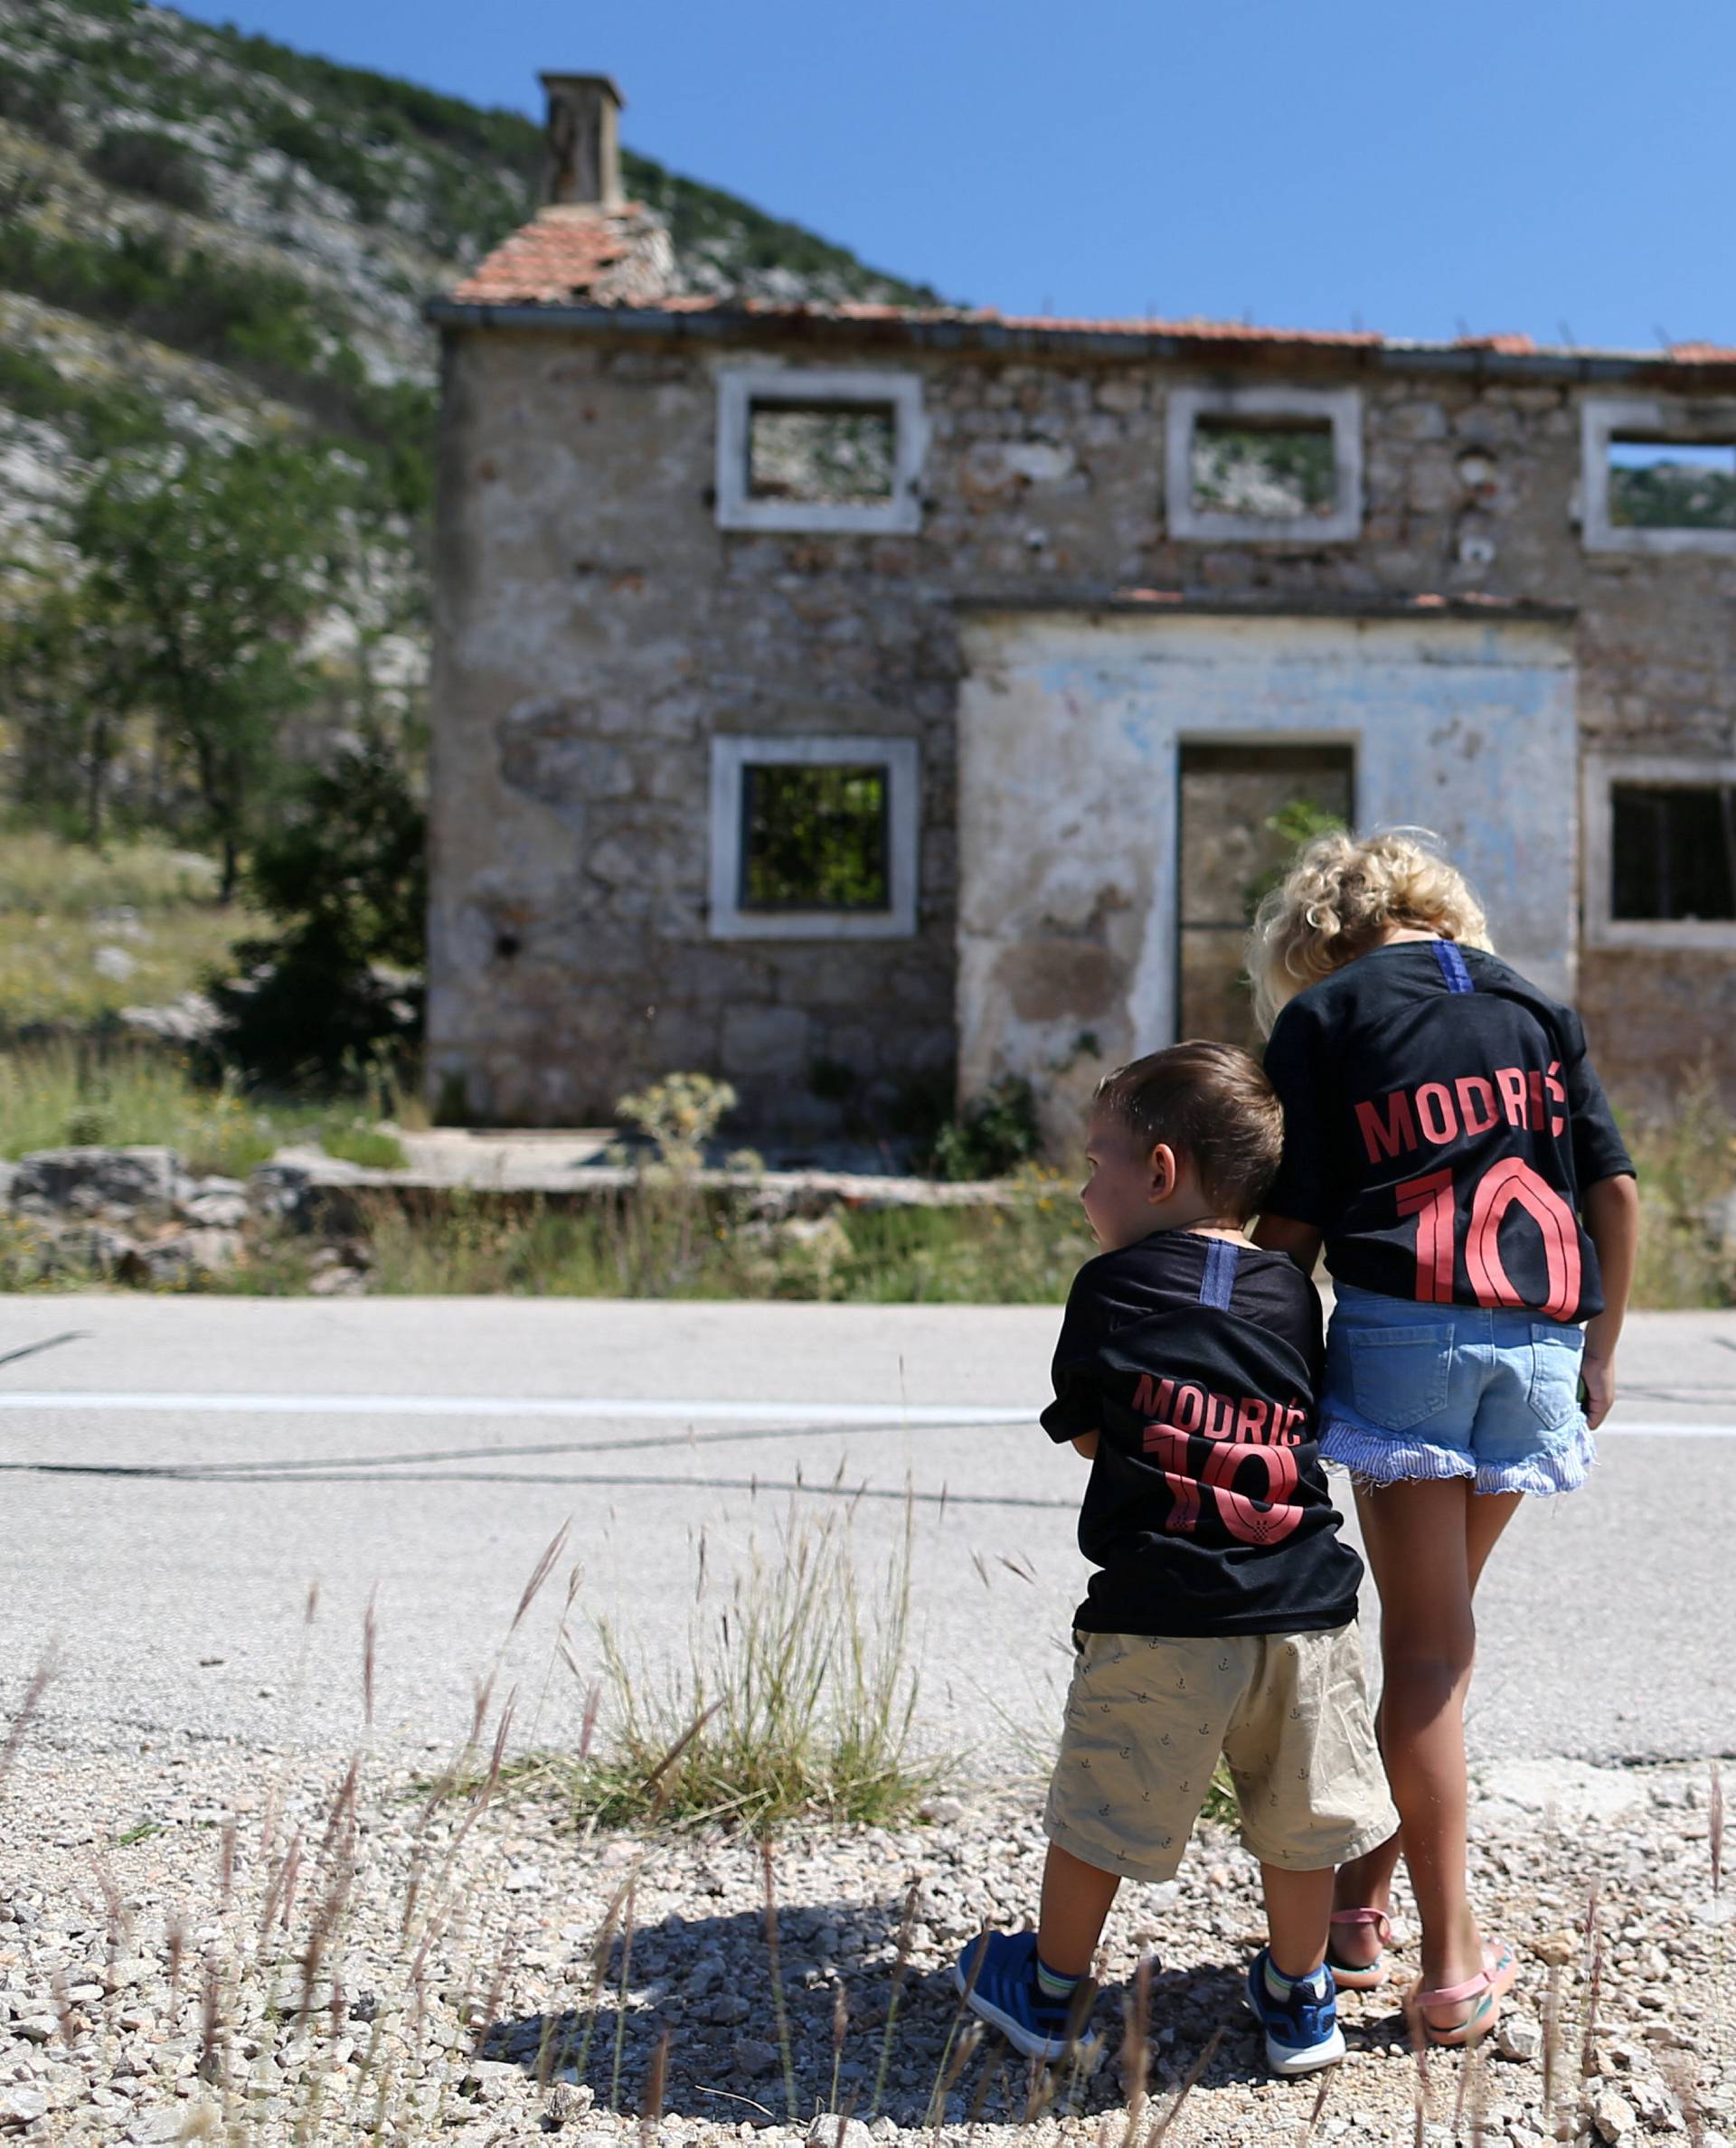 Kids are seen in front of Luka Modric's birth house in Modrici village